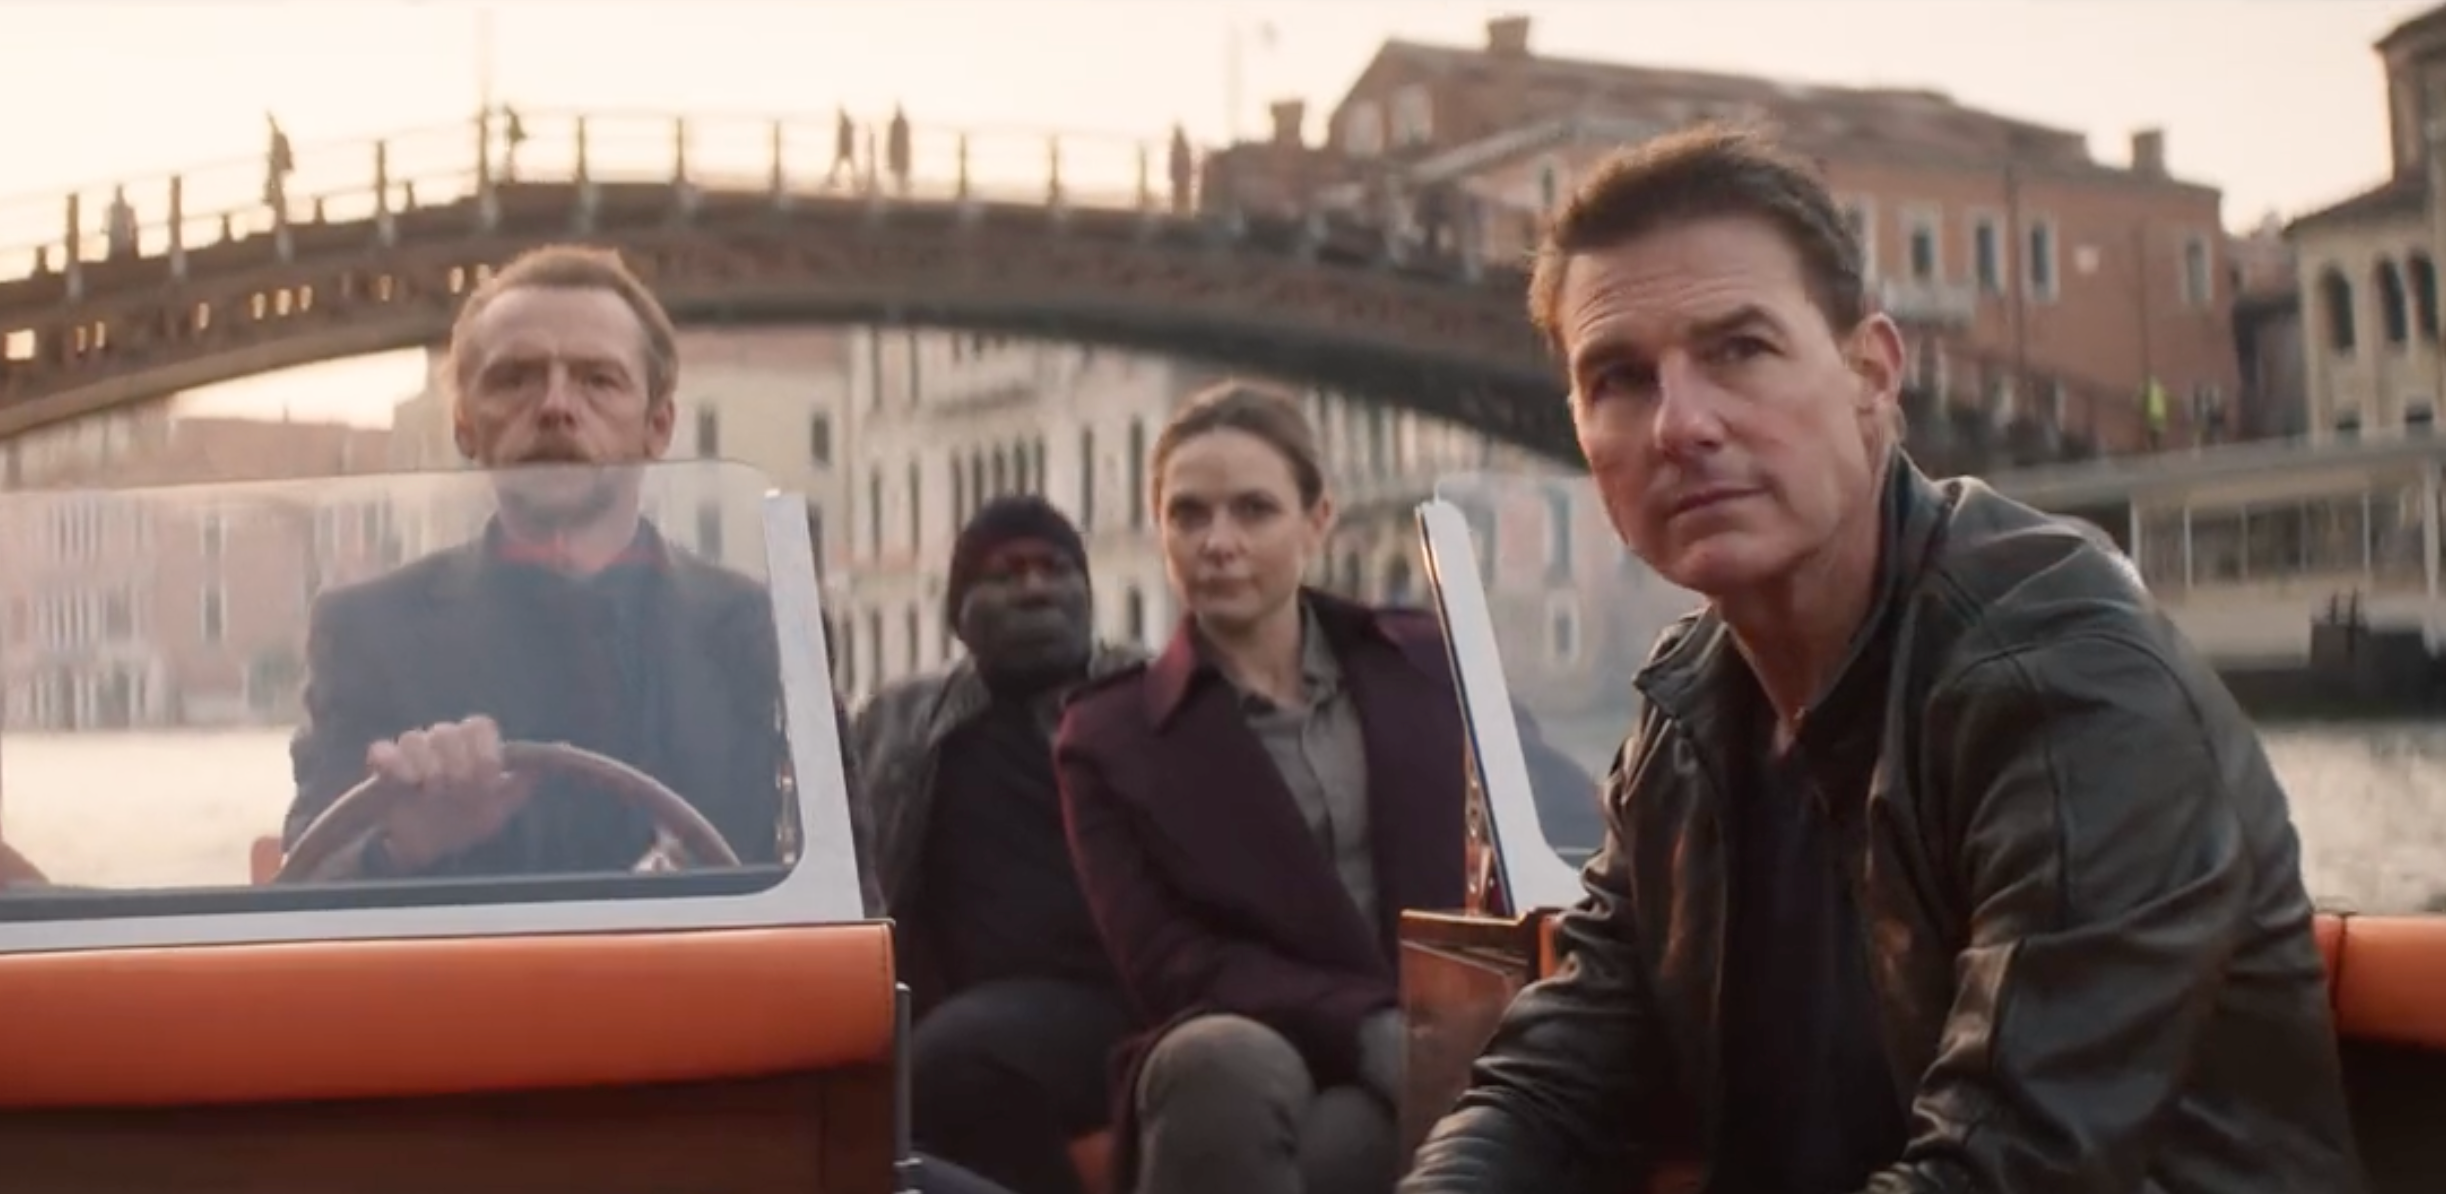 (L-R) Simon Pegg, Ving Rhames, Rebecca Ferguson, and Tom Cruise in "Mission: Impossible - Dead Reckoning Part One"